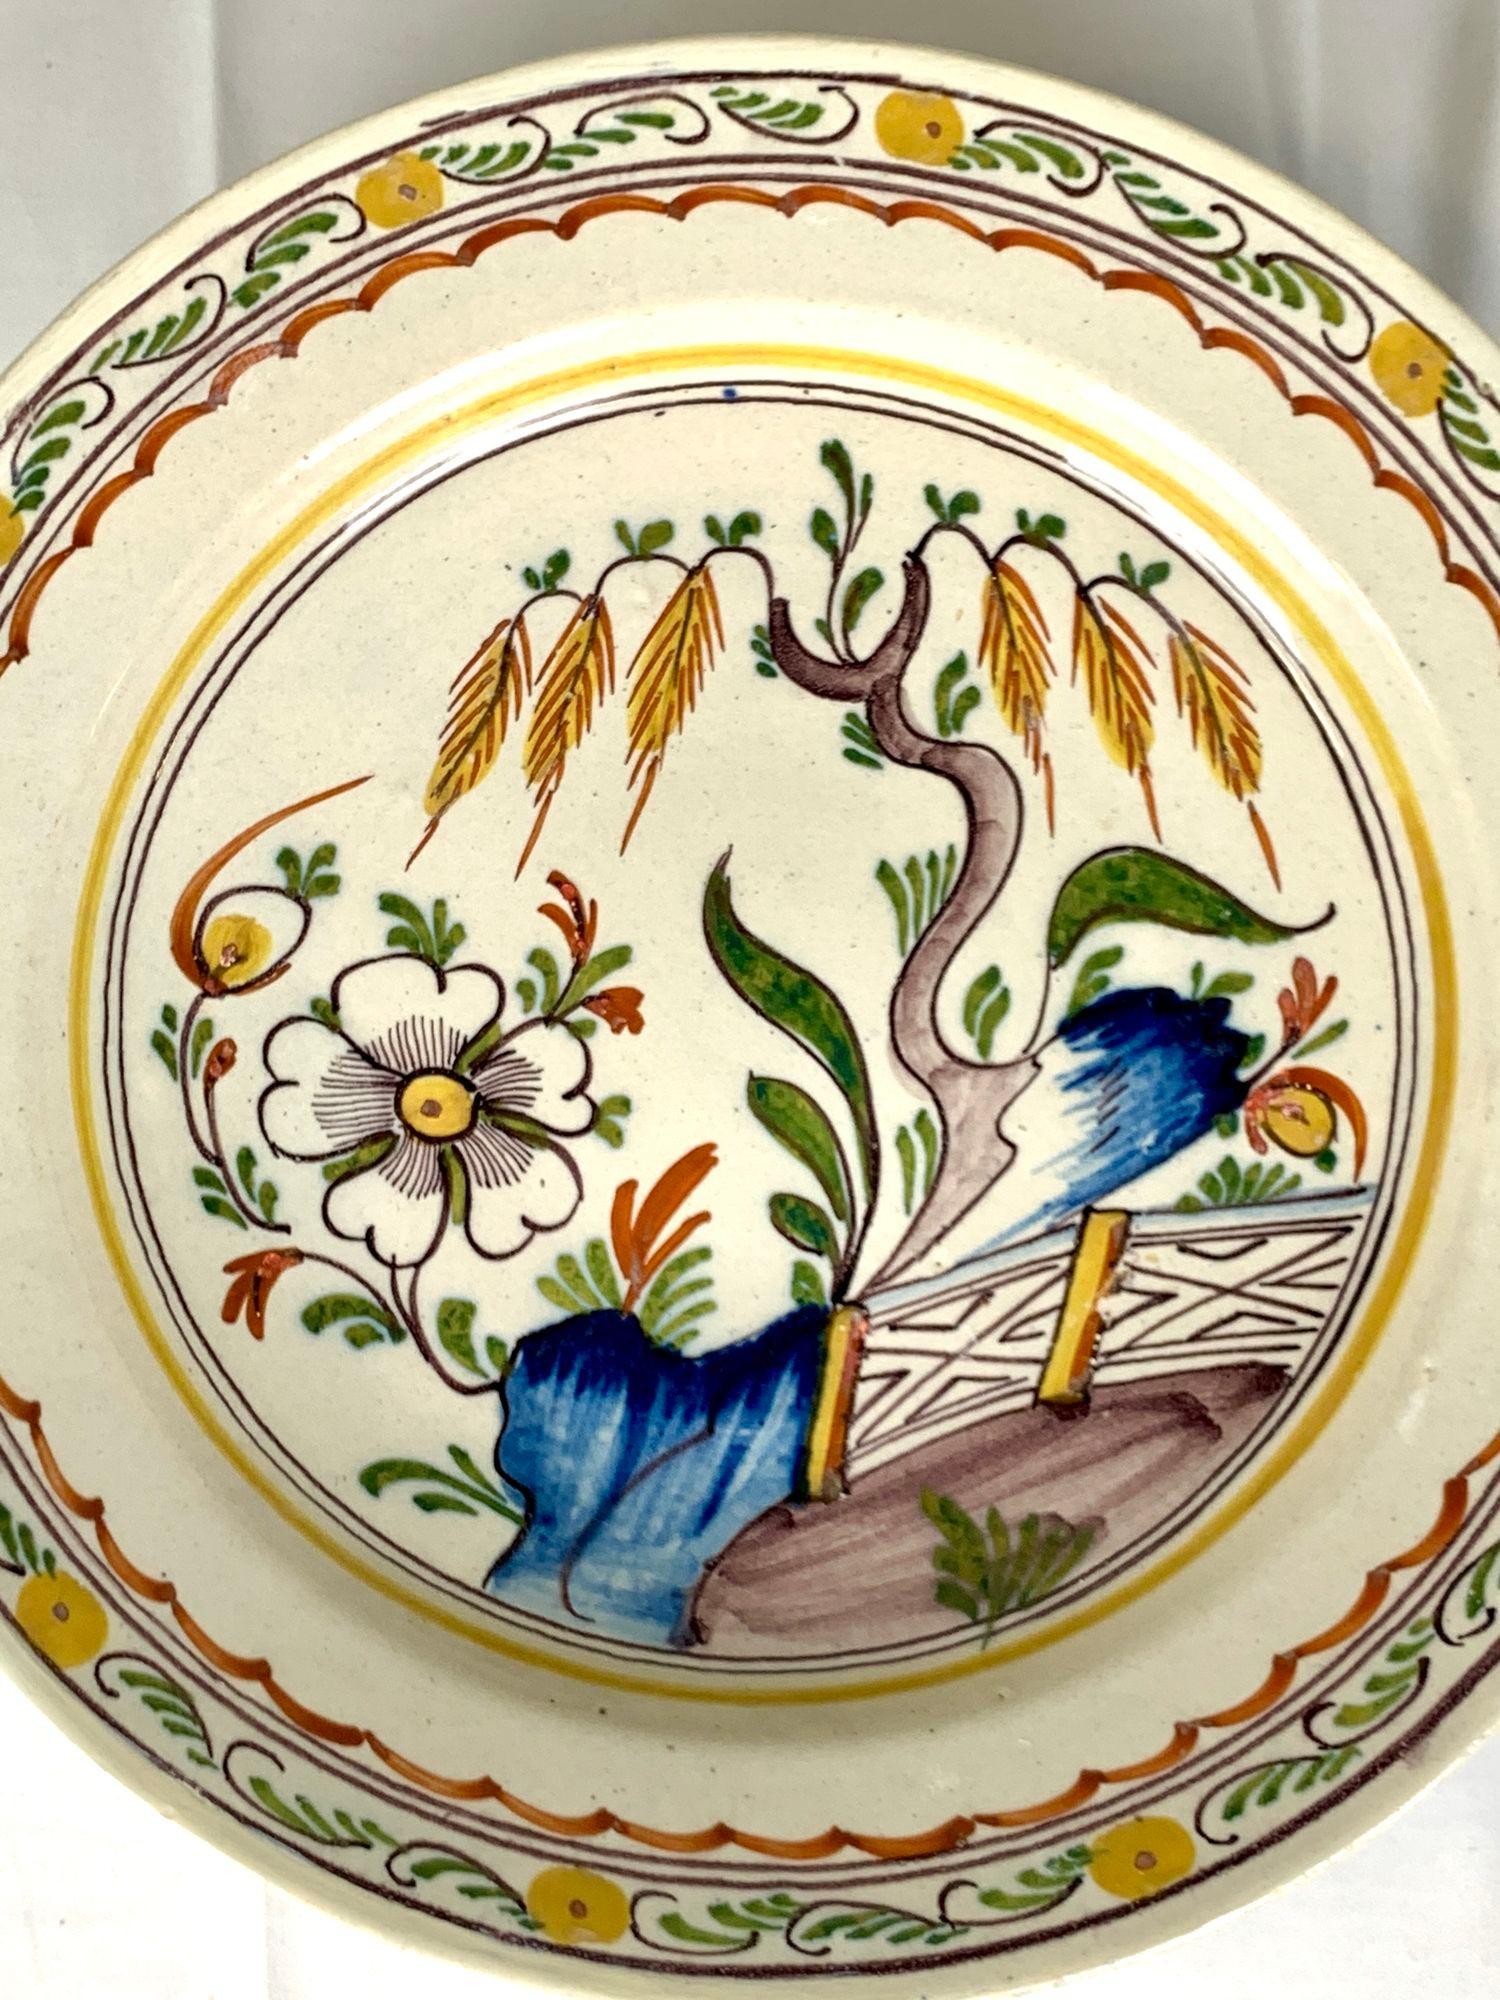 This antique Dutch Delft charger is hand painted in a vibrant array of polychrome hues, including cobalt blue, green, yellow, iron red, ochre, and manganese purple.
We see a beautiful flower-filled garden featuring a willow tree with a purple trunk